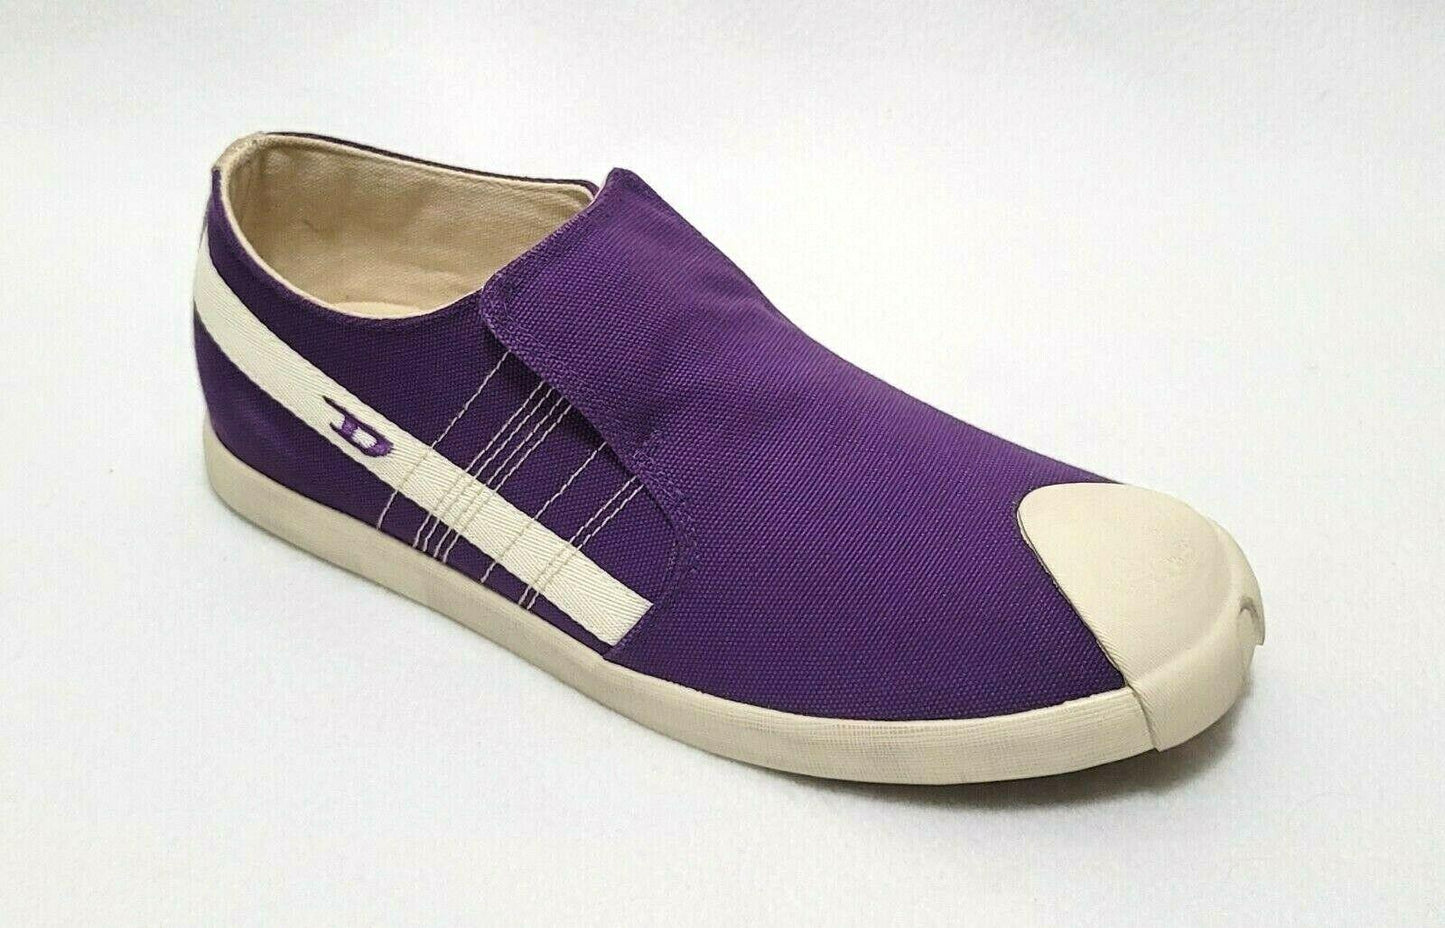 Diesel Sophomore Currant Purple Canvas Womens Fashion Sneakers  Shoes Size US 8.5 M - SVNYFancy